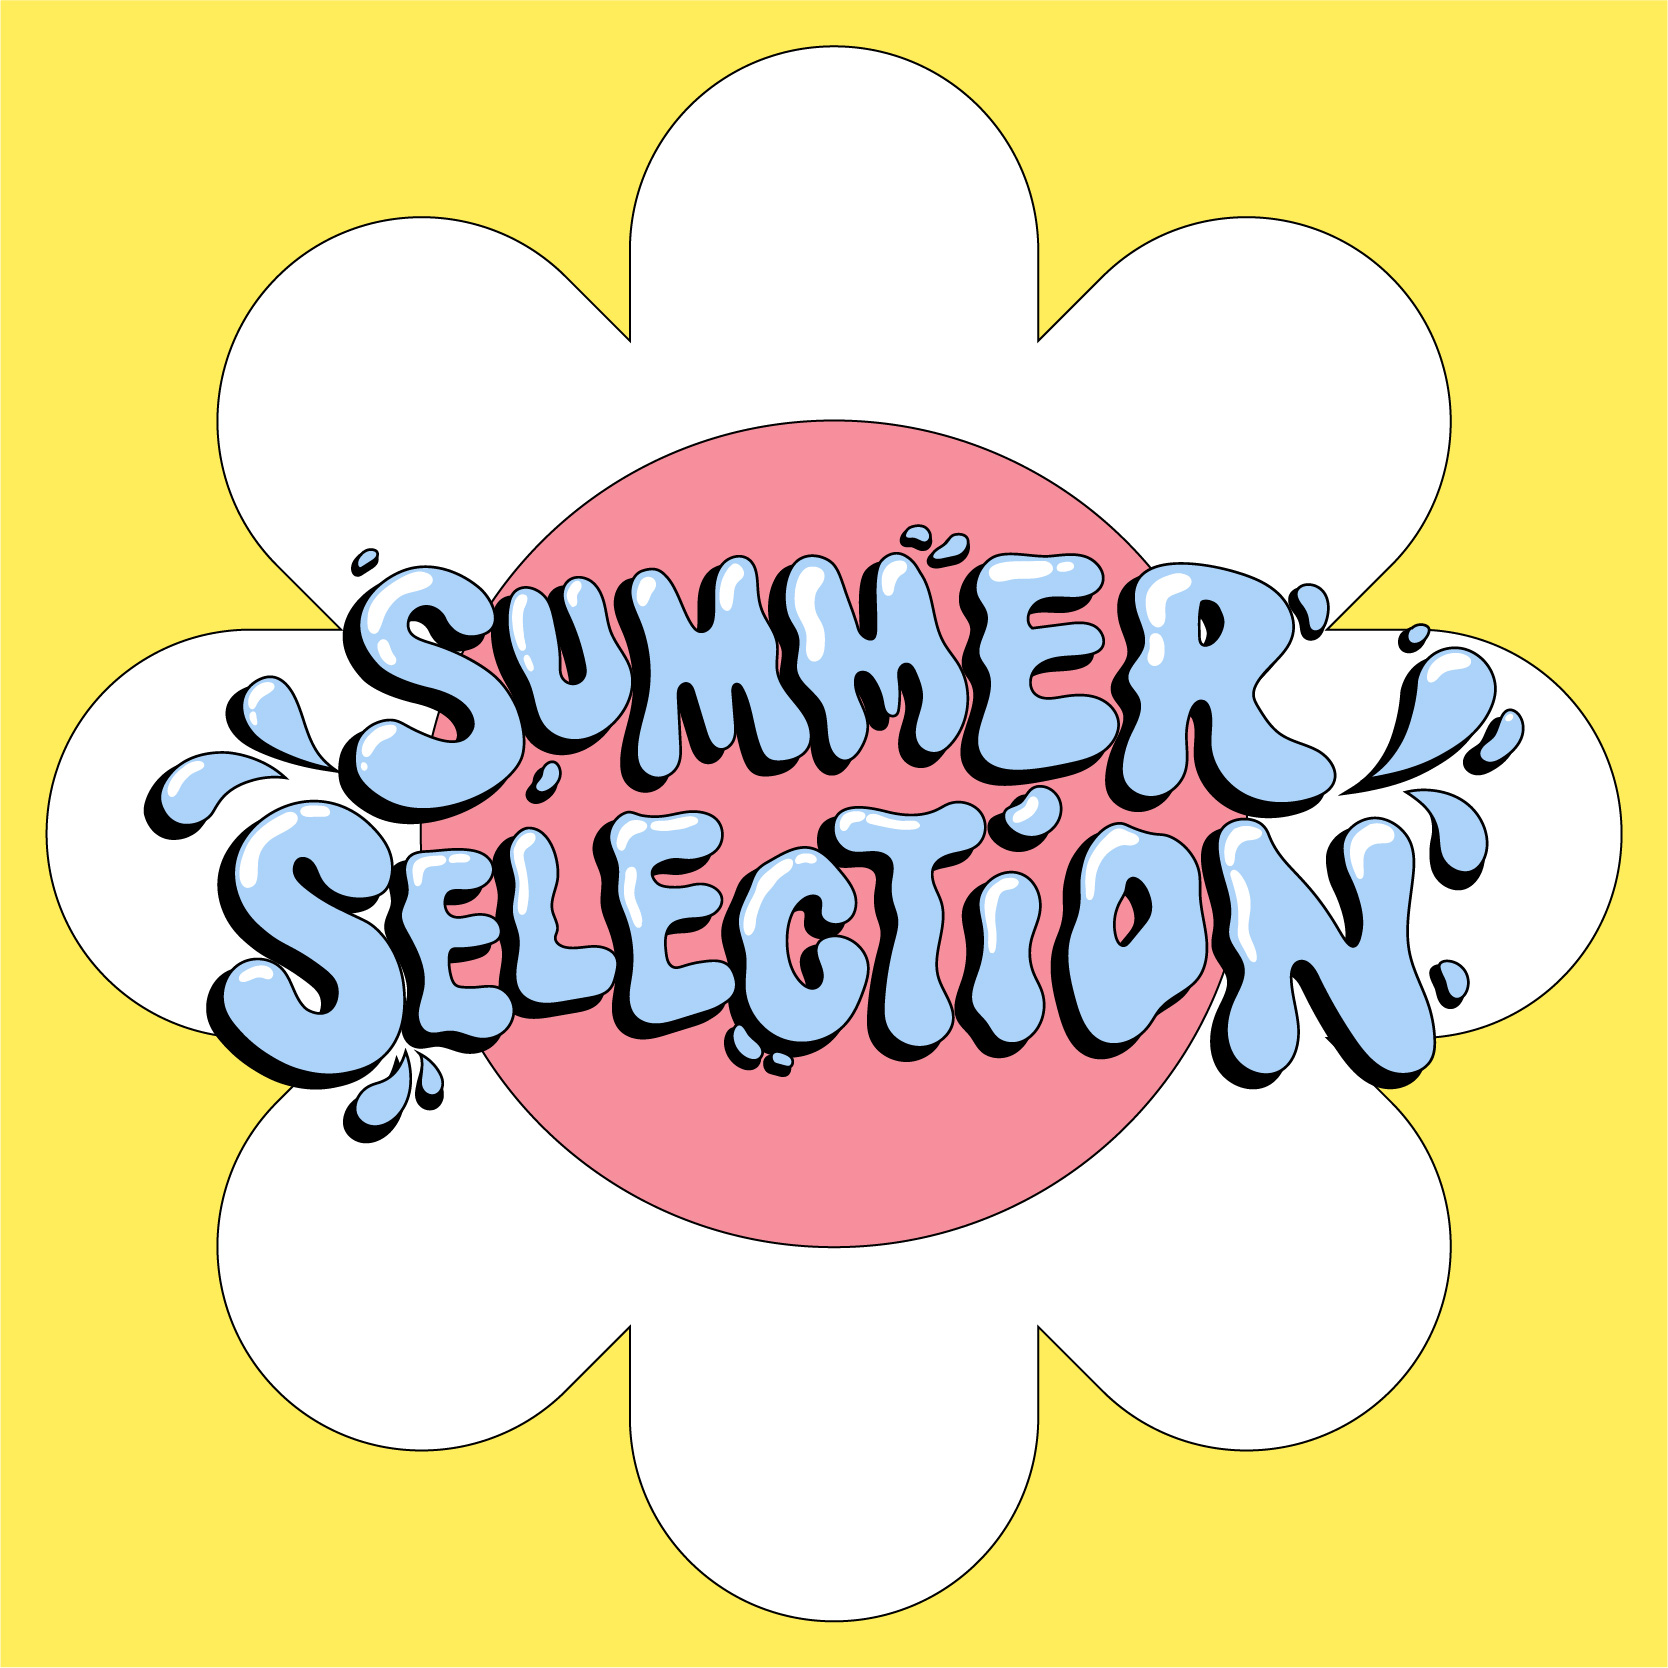 Teen Jesus and the Jean Teasers Interview on Summer Selection - 15/1/23